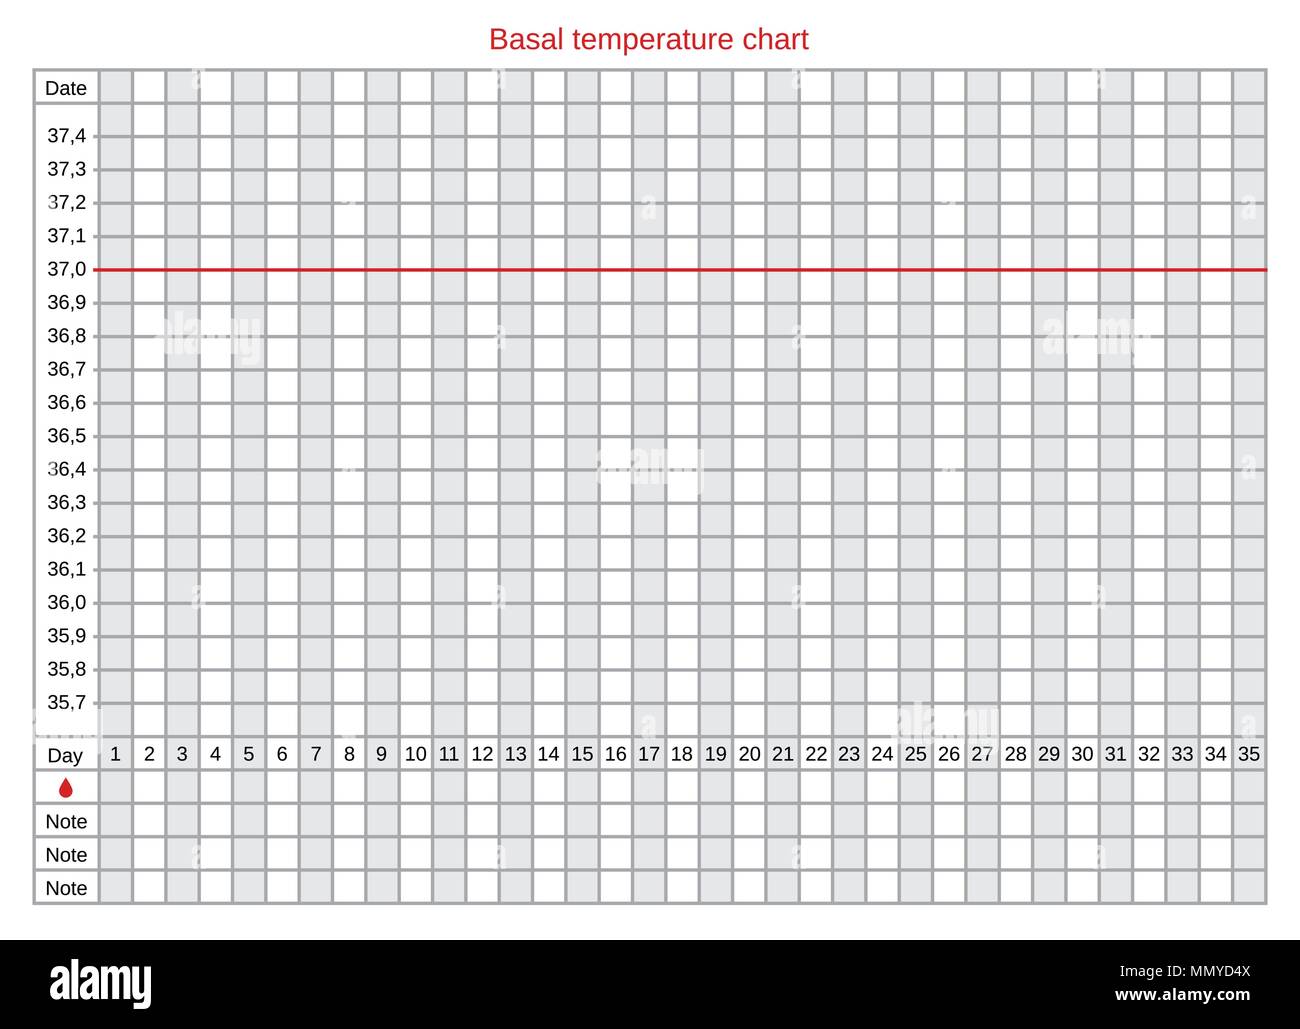 Body Temp In Celsius Chart